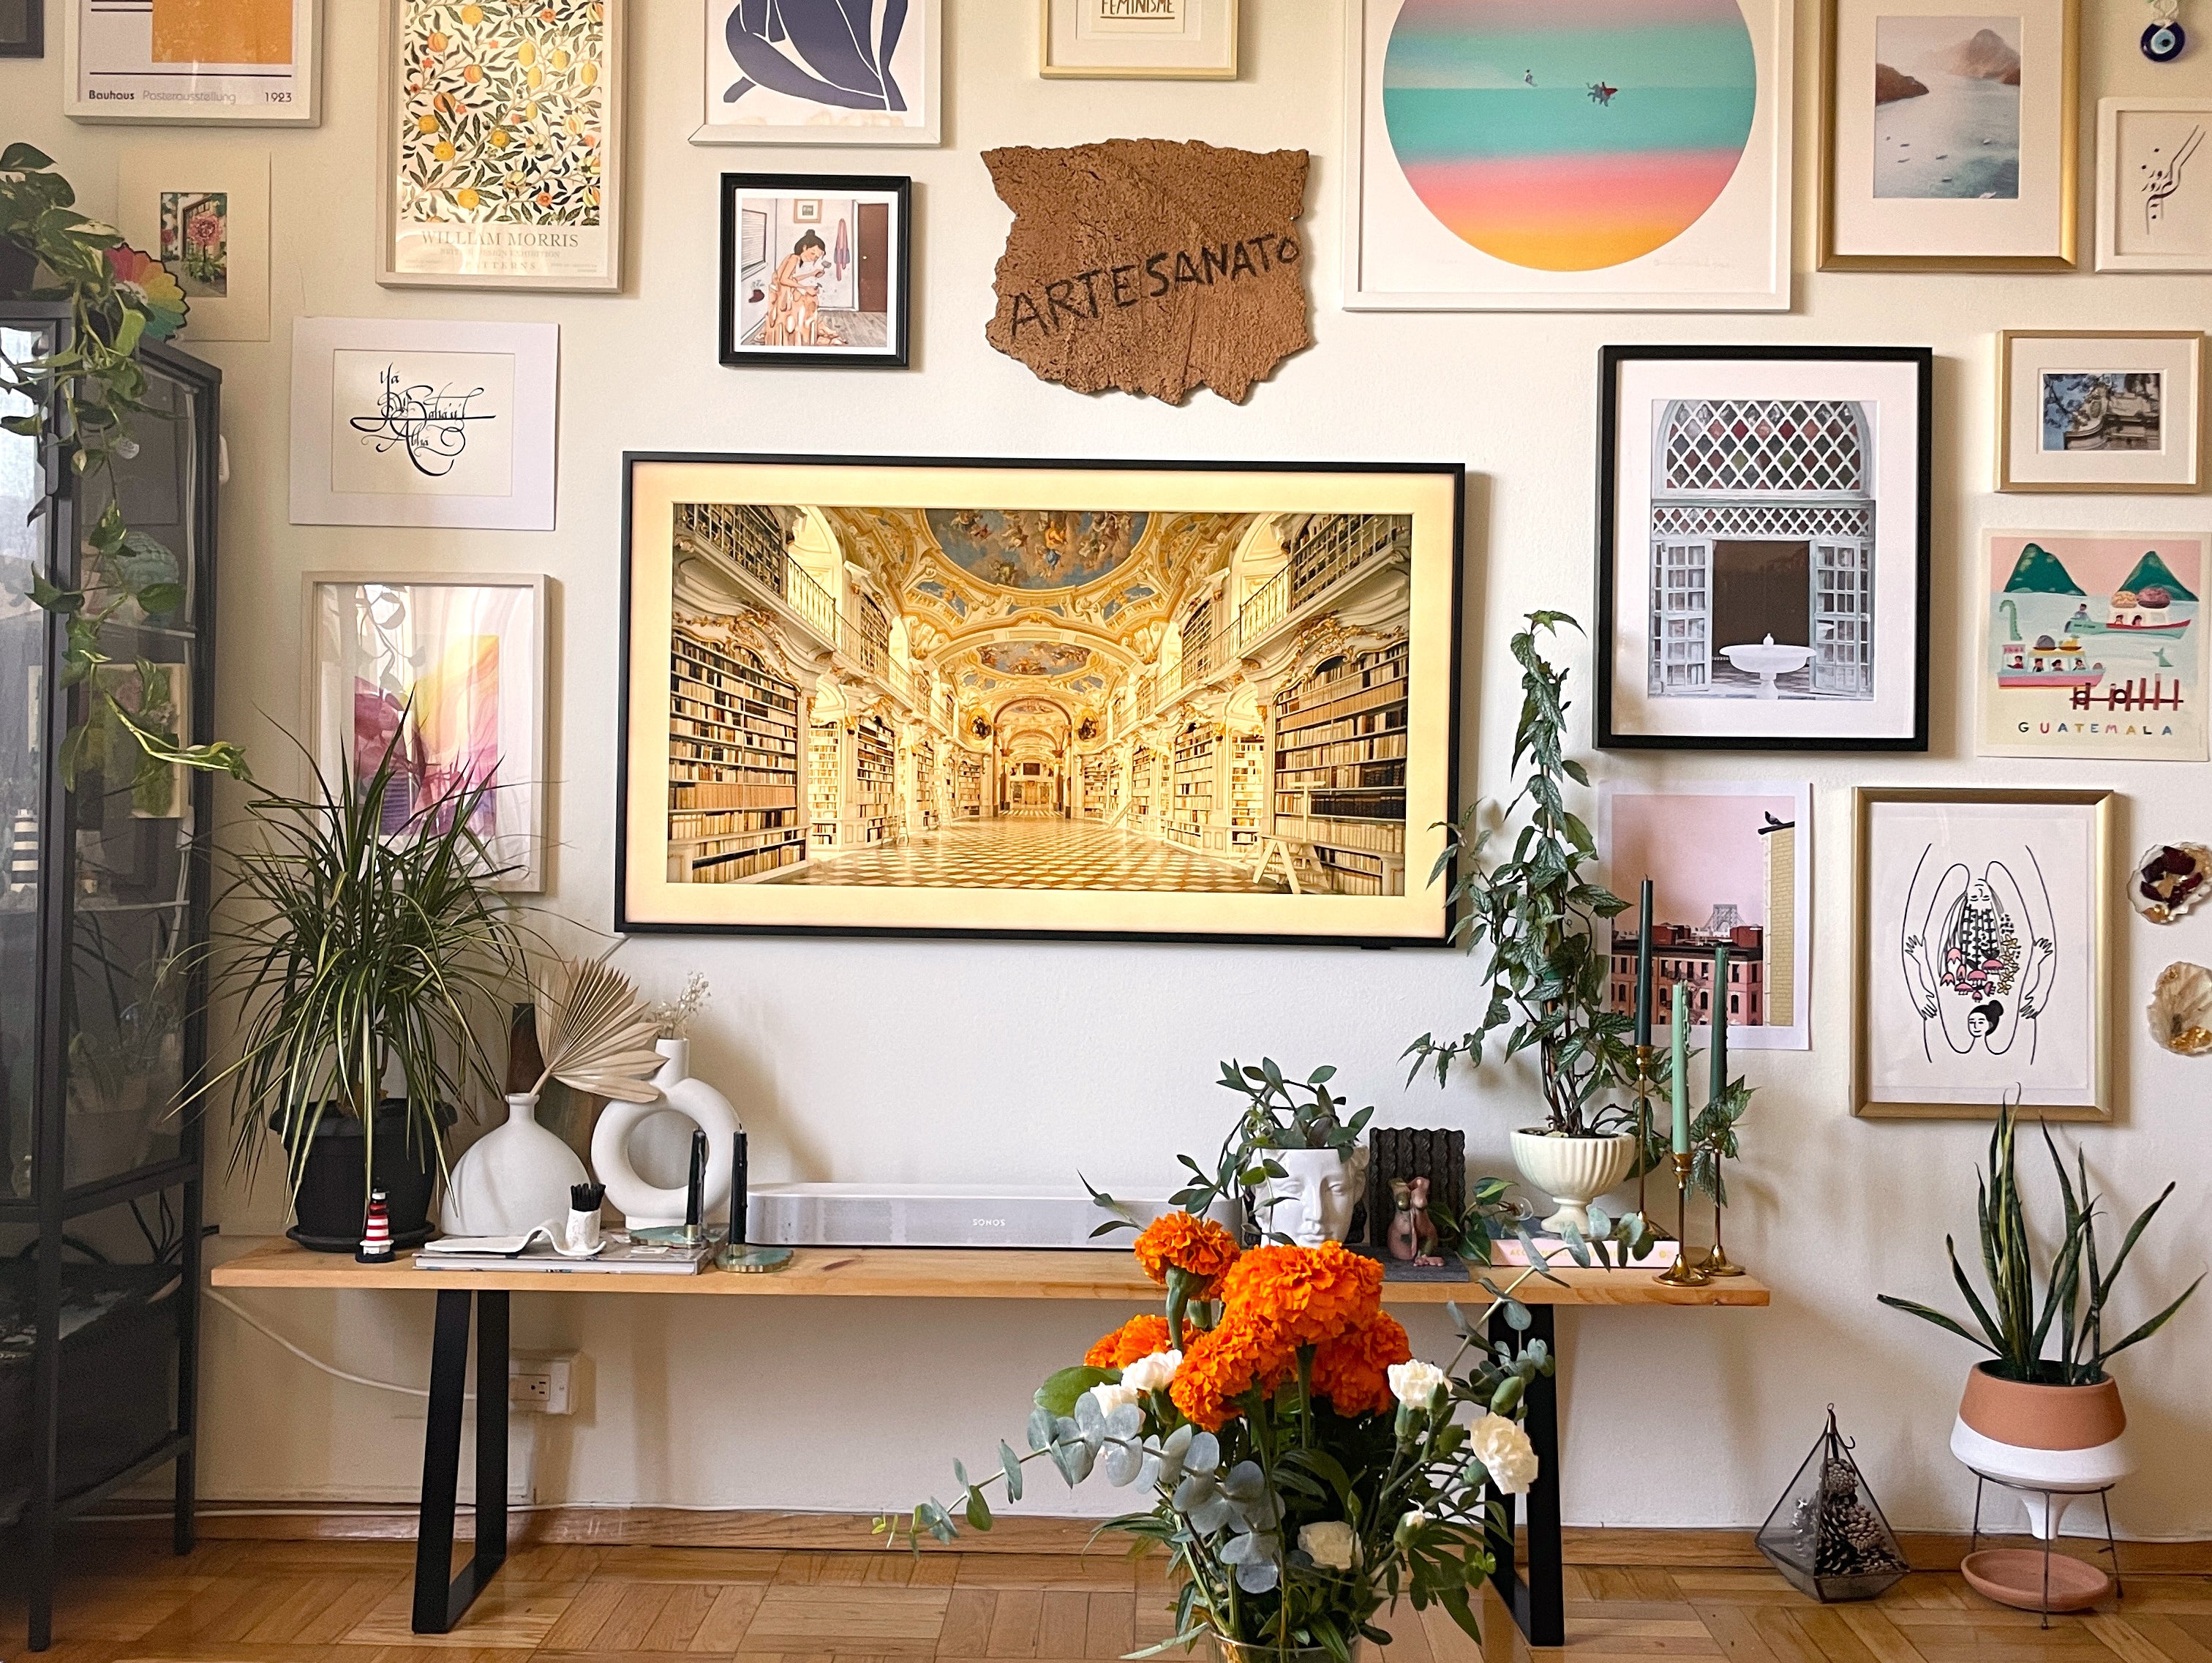 Explore Meher's Creative and Curated NYC Apartment